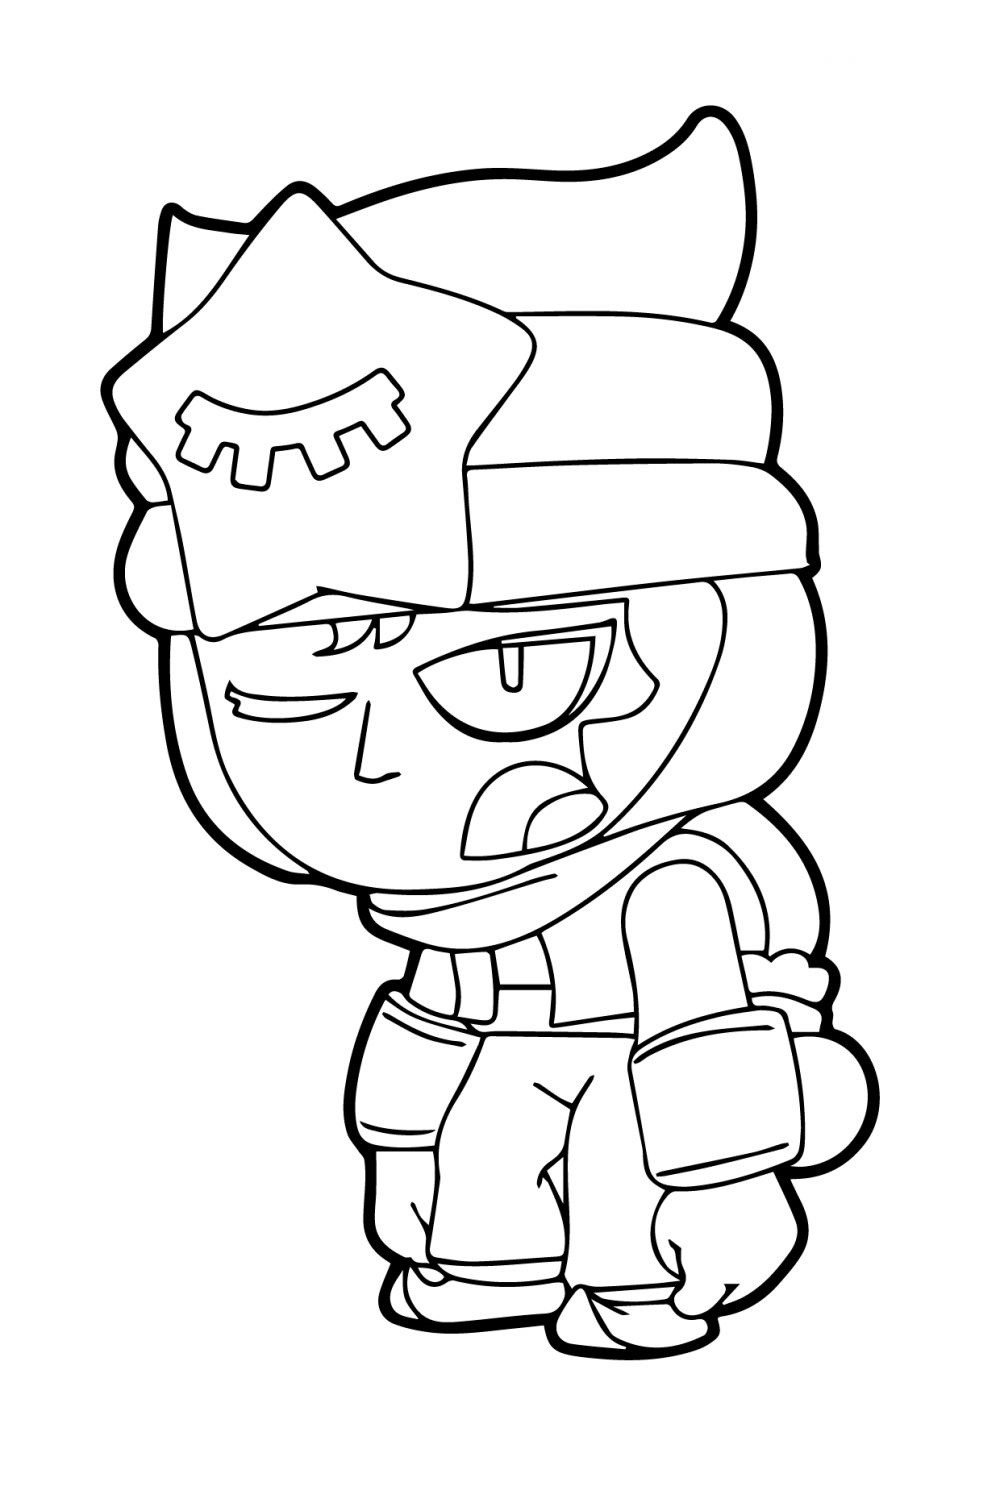 Sandy Coloring Pages Print Brawl Stars Character For Free - brawl stars émeri voix